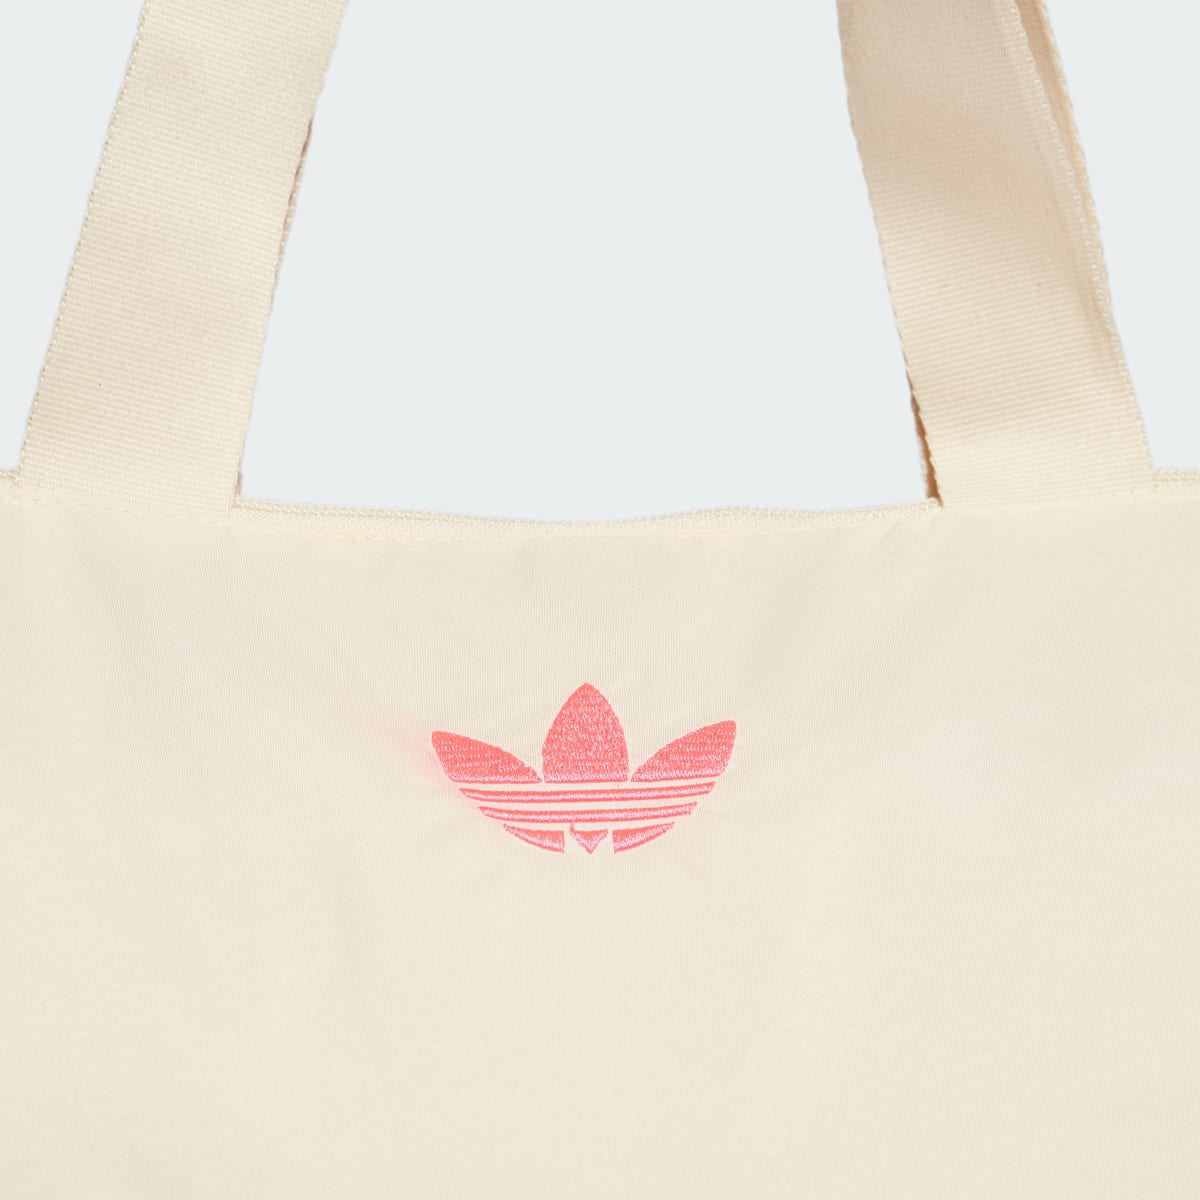 Adidas Quilted Trefoil Shopper. 6